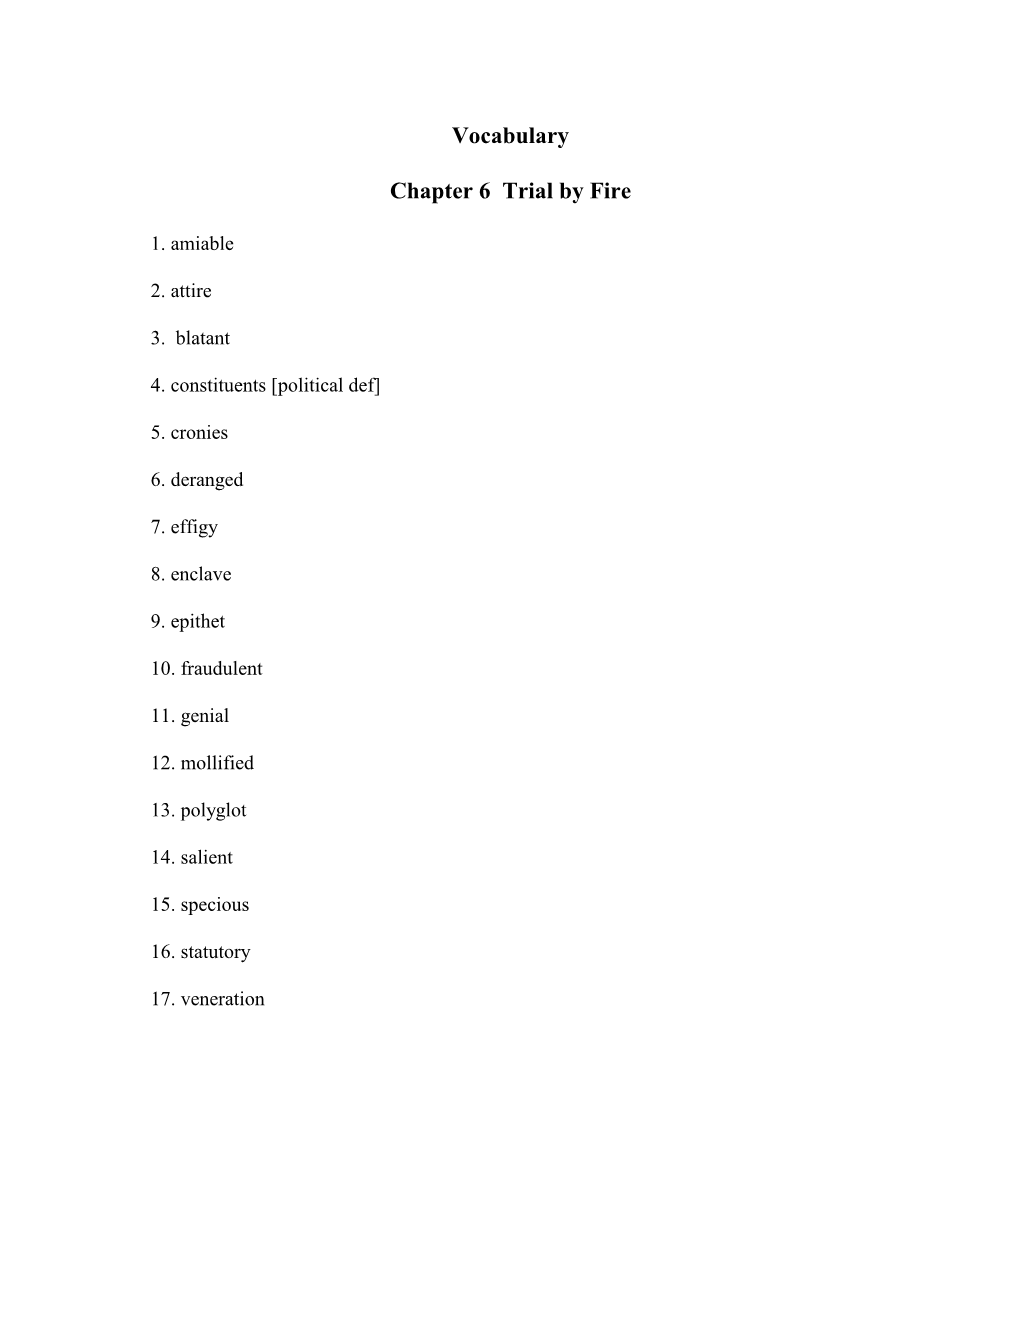 Vocabulary Chapter 6 Trial by Fire